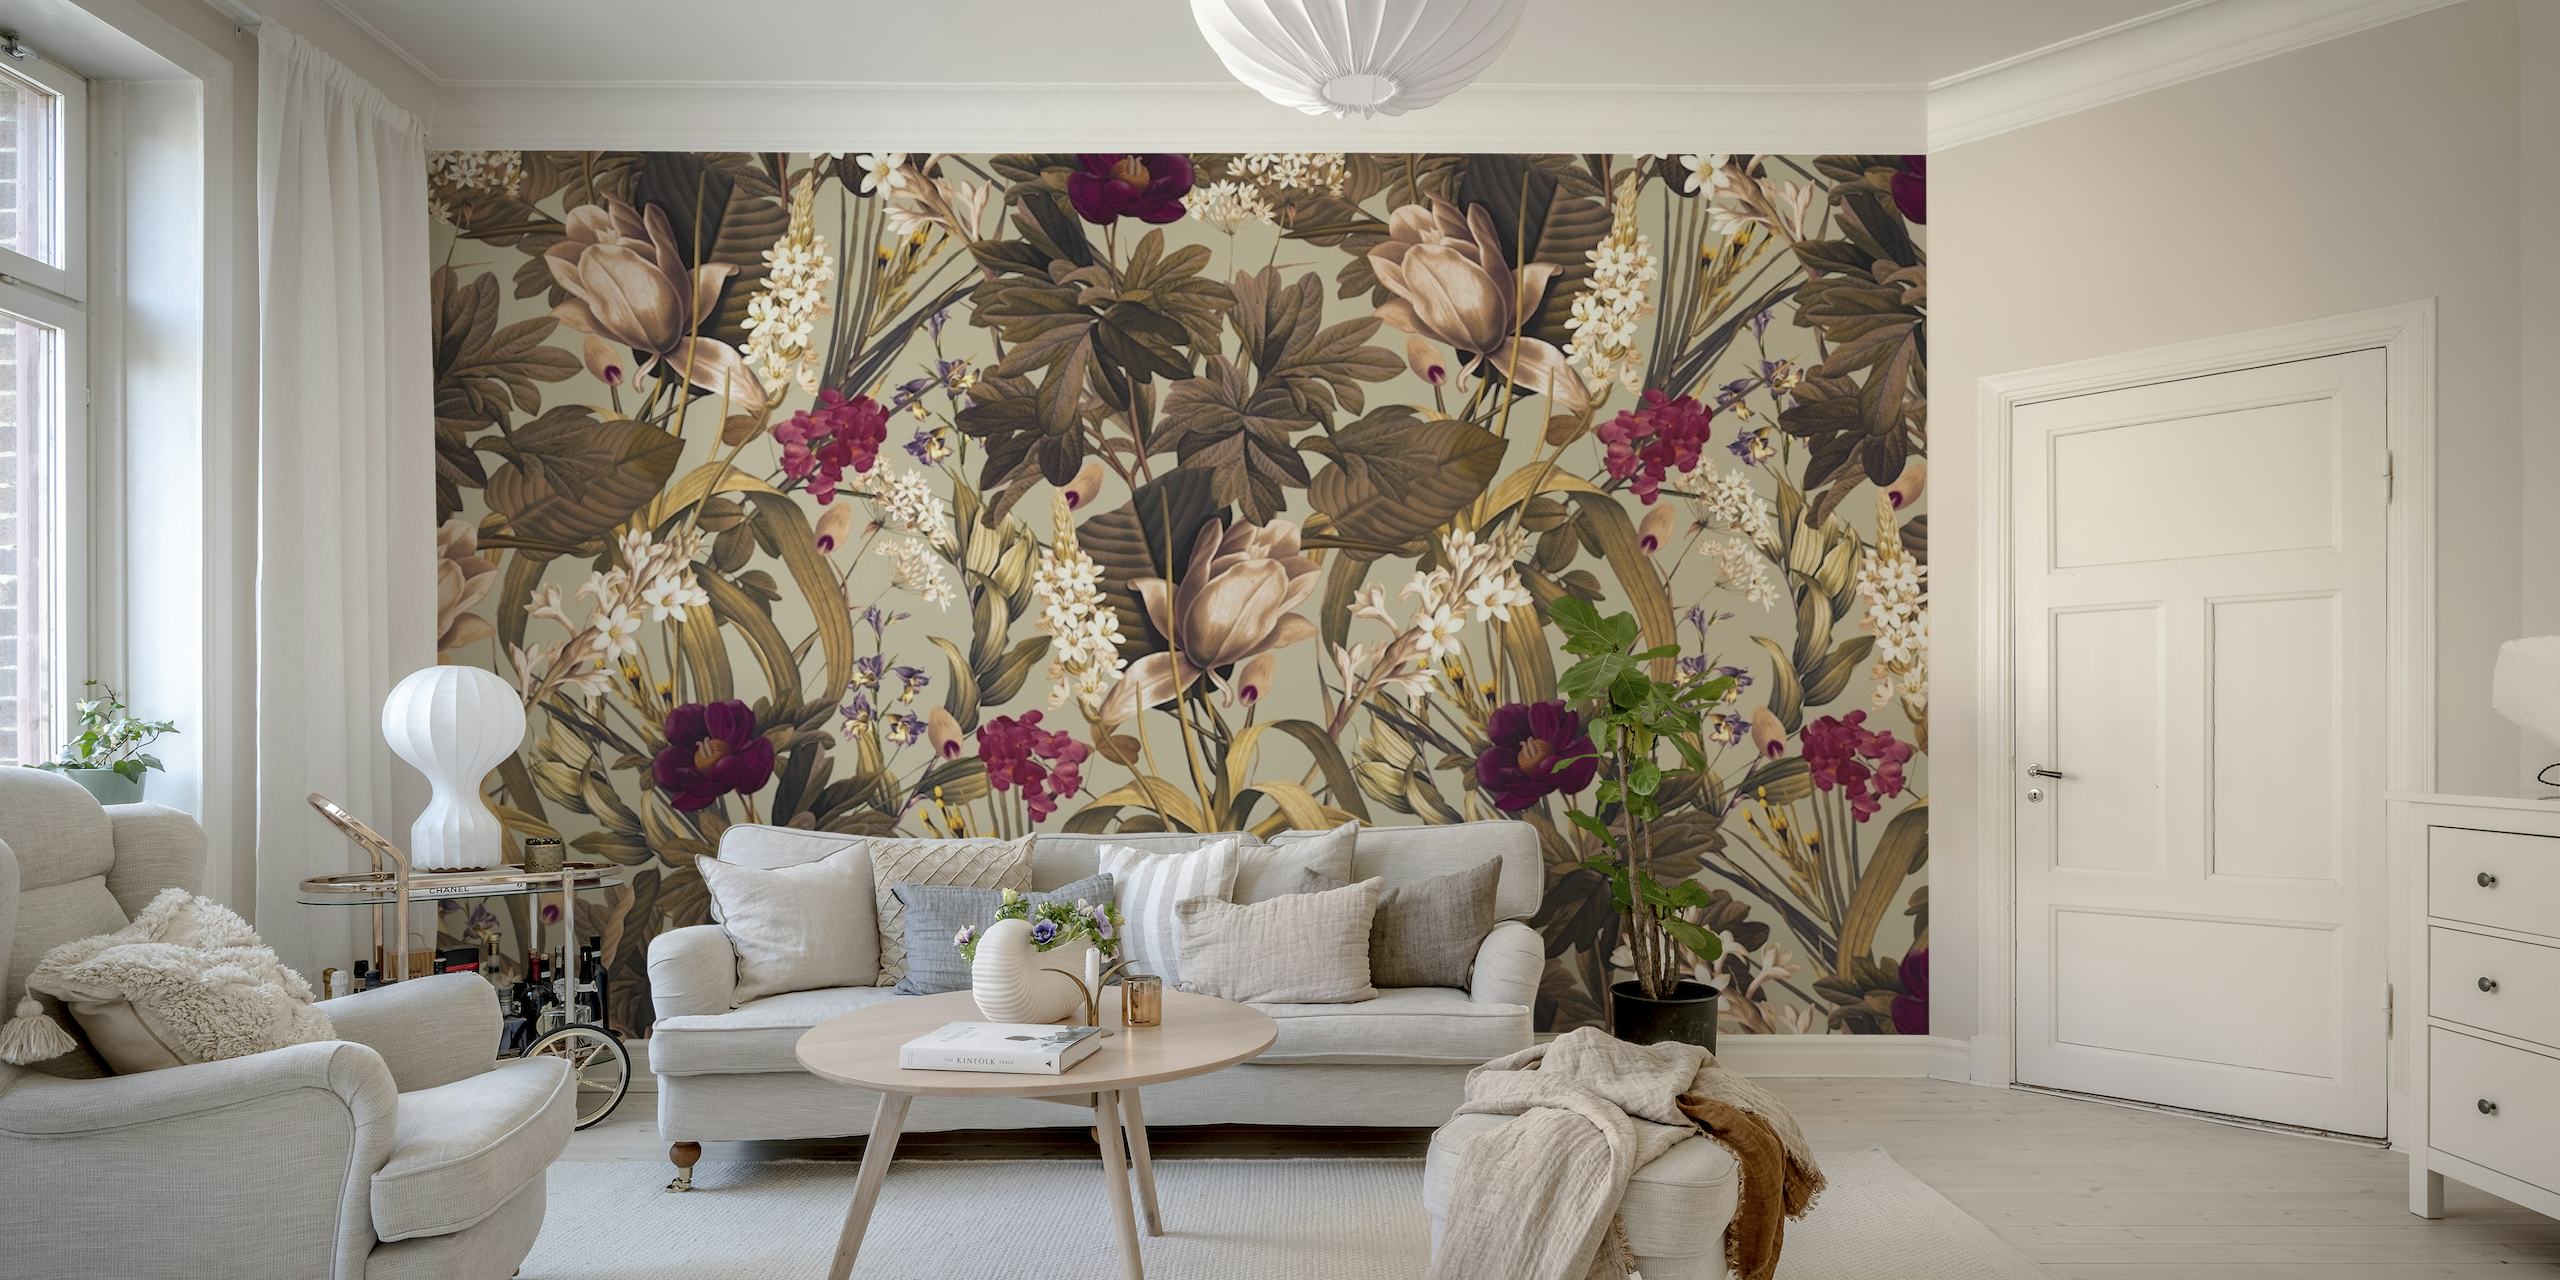 Garden of Eden IV wall mural with florals in burgundy, cream and brown